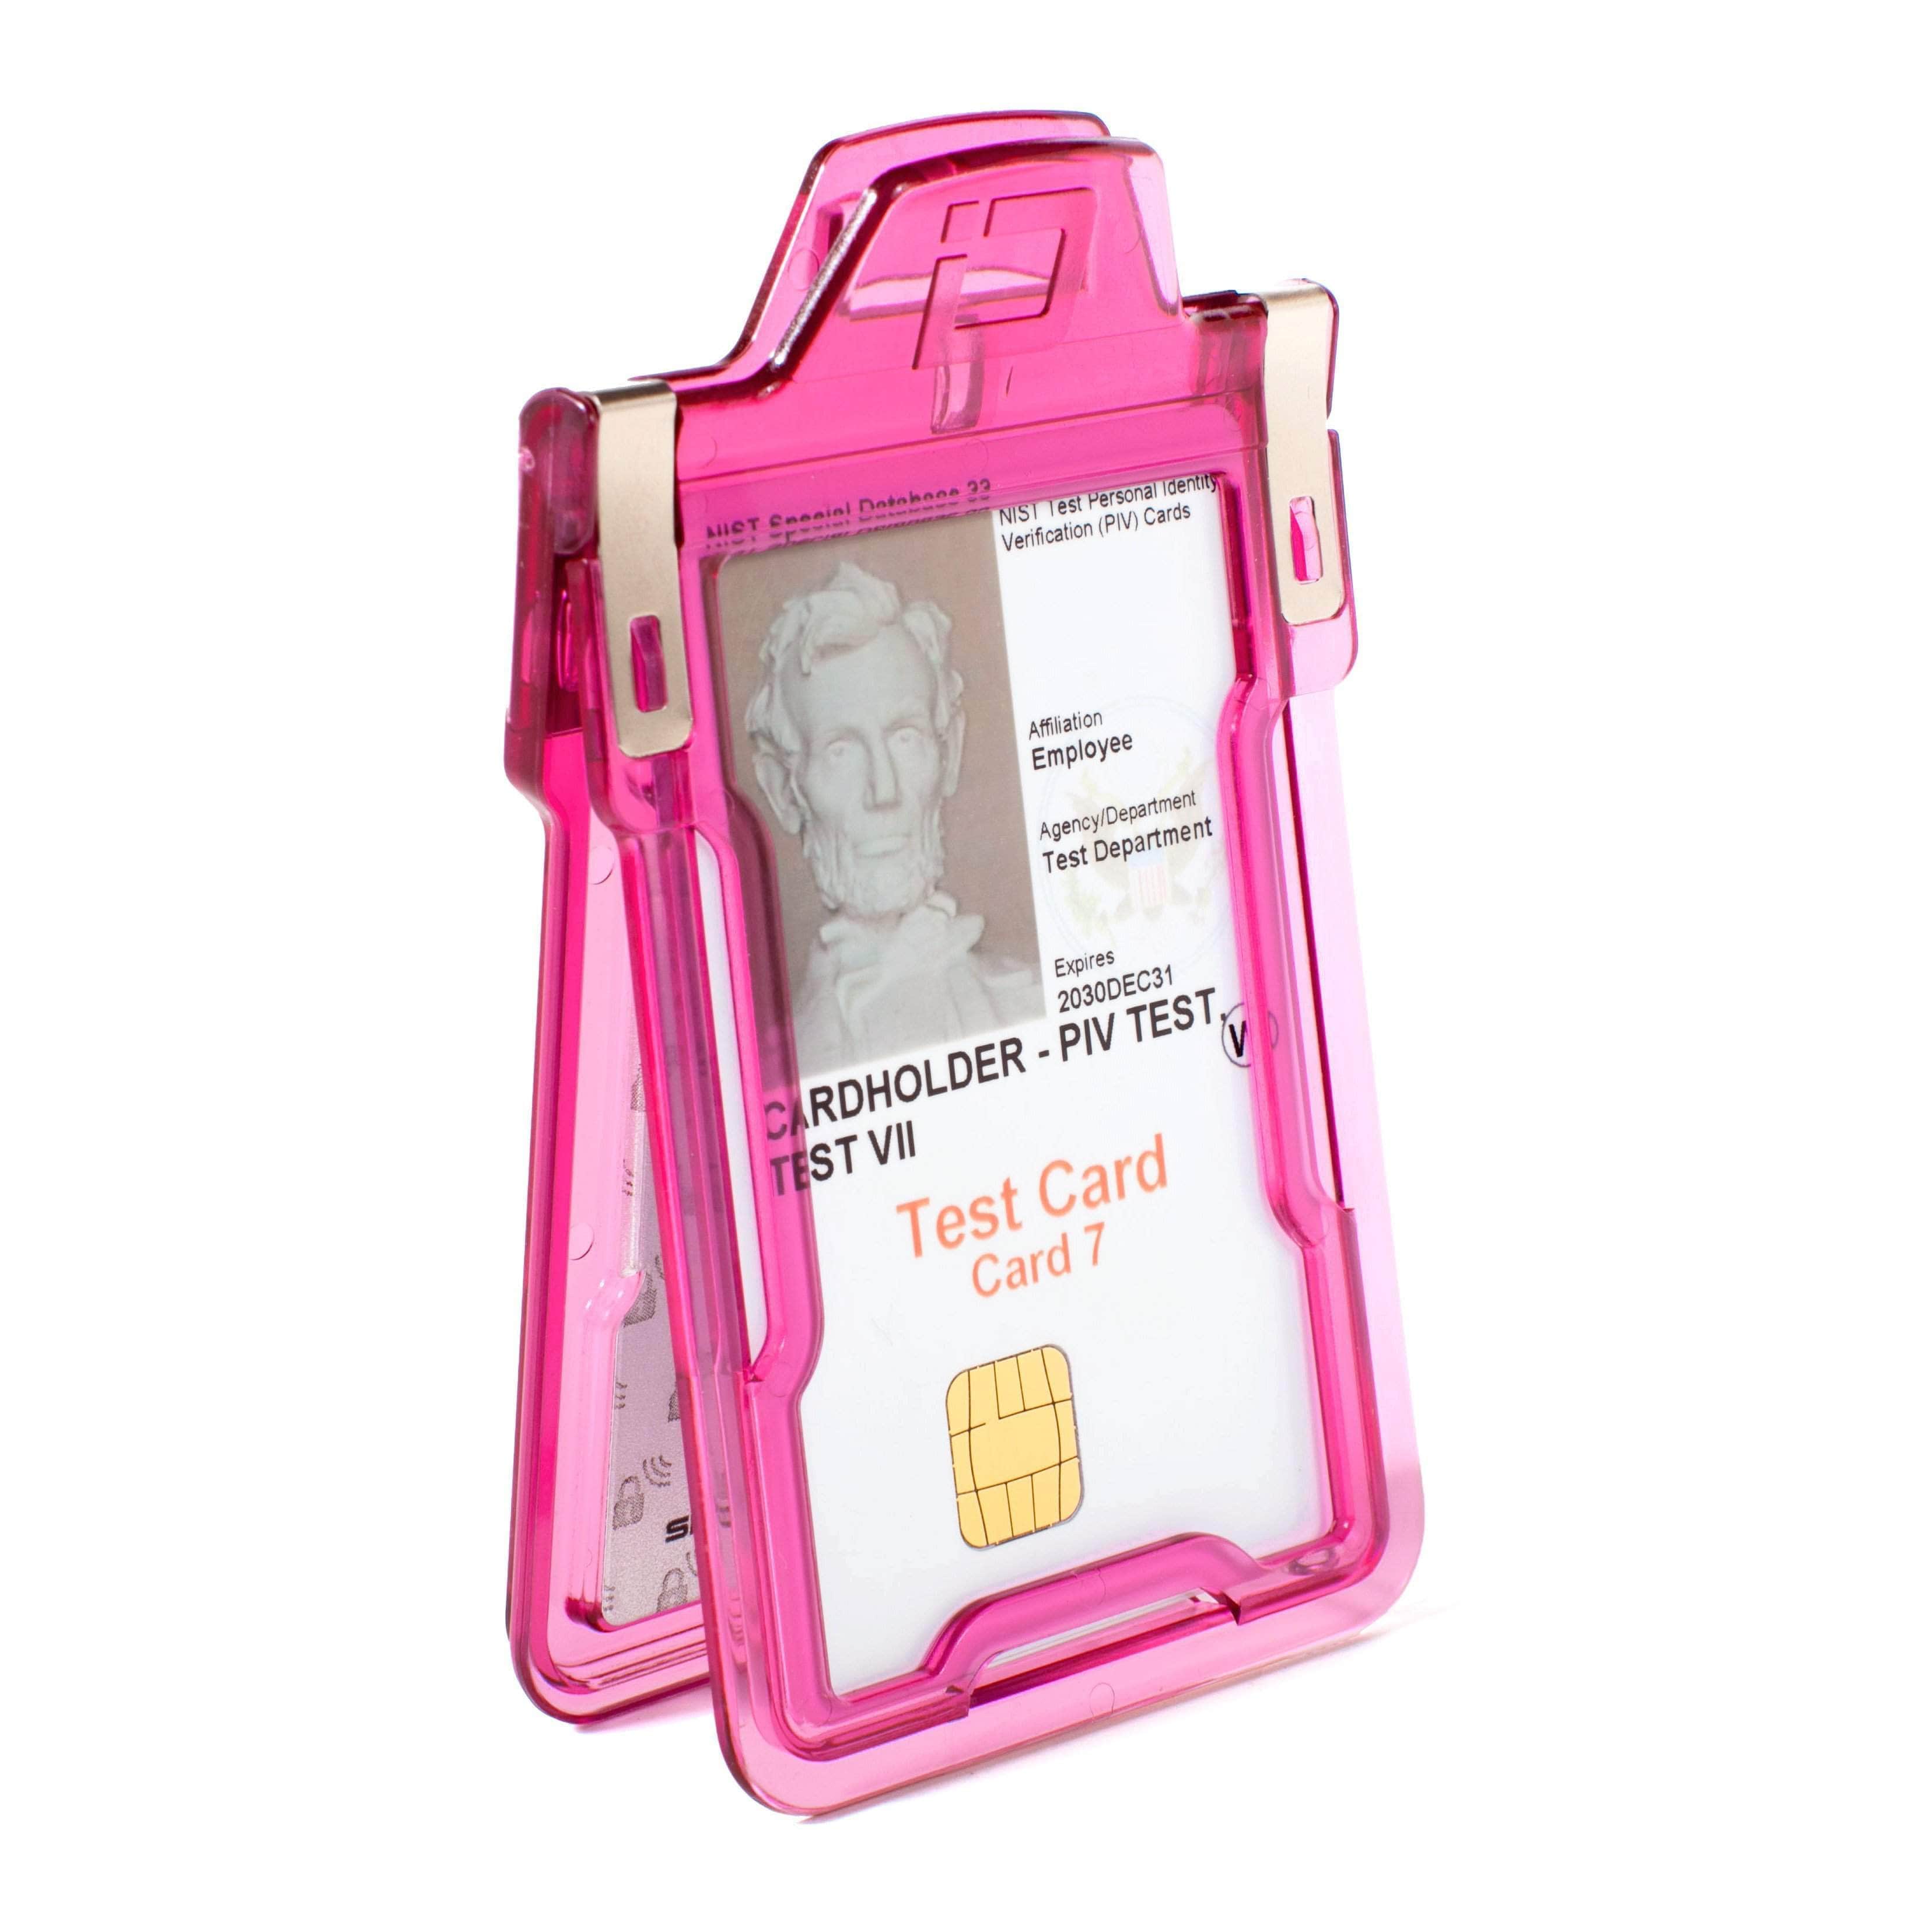 ID Stronghold Badgeholder BloxProx Pink Secure Badge Holder with BloxProx™ - Protects 125Khz HID Prox 1 Card Holder